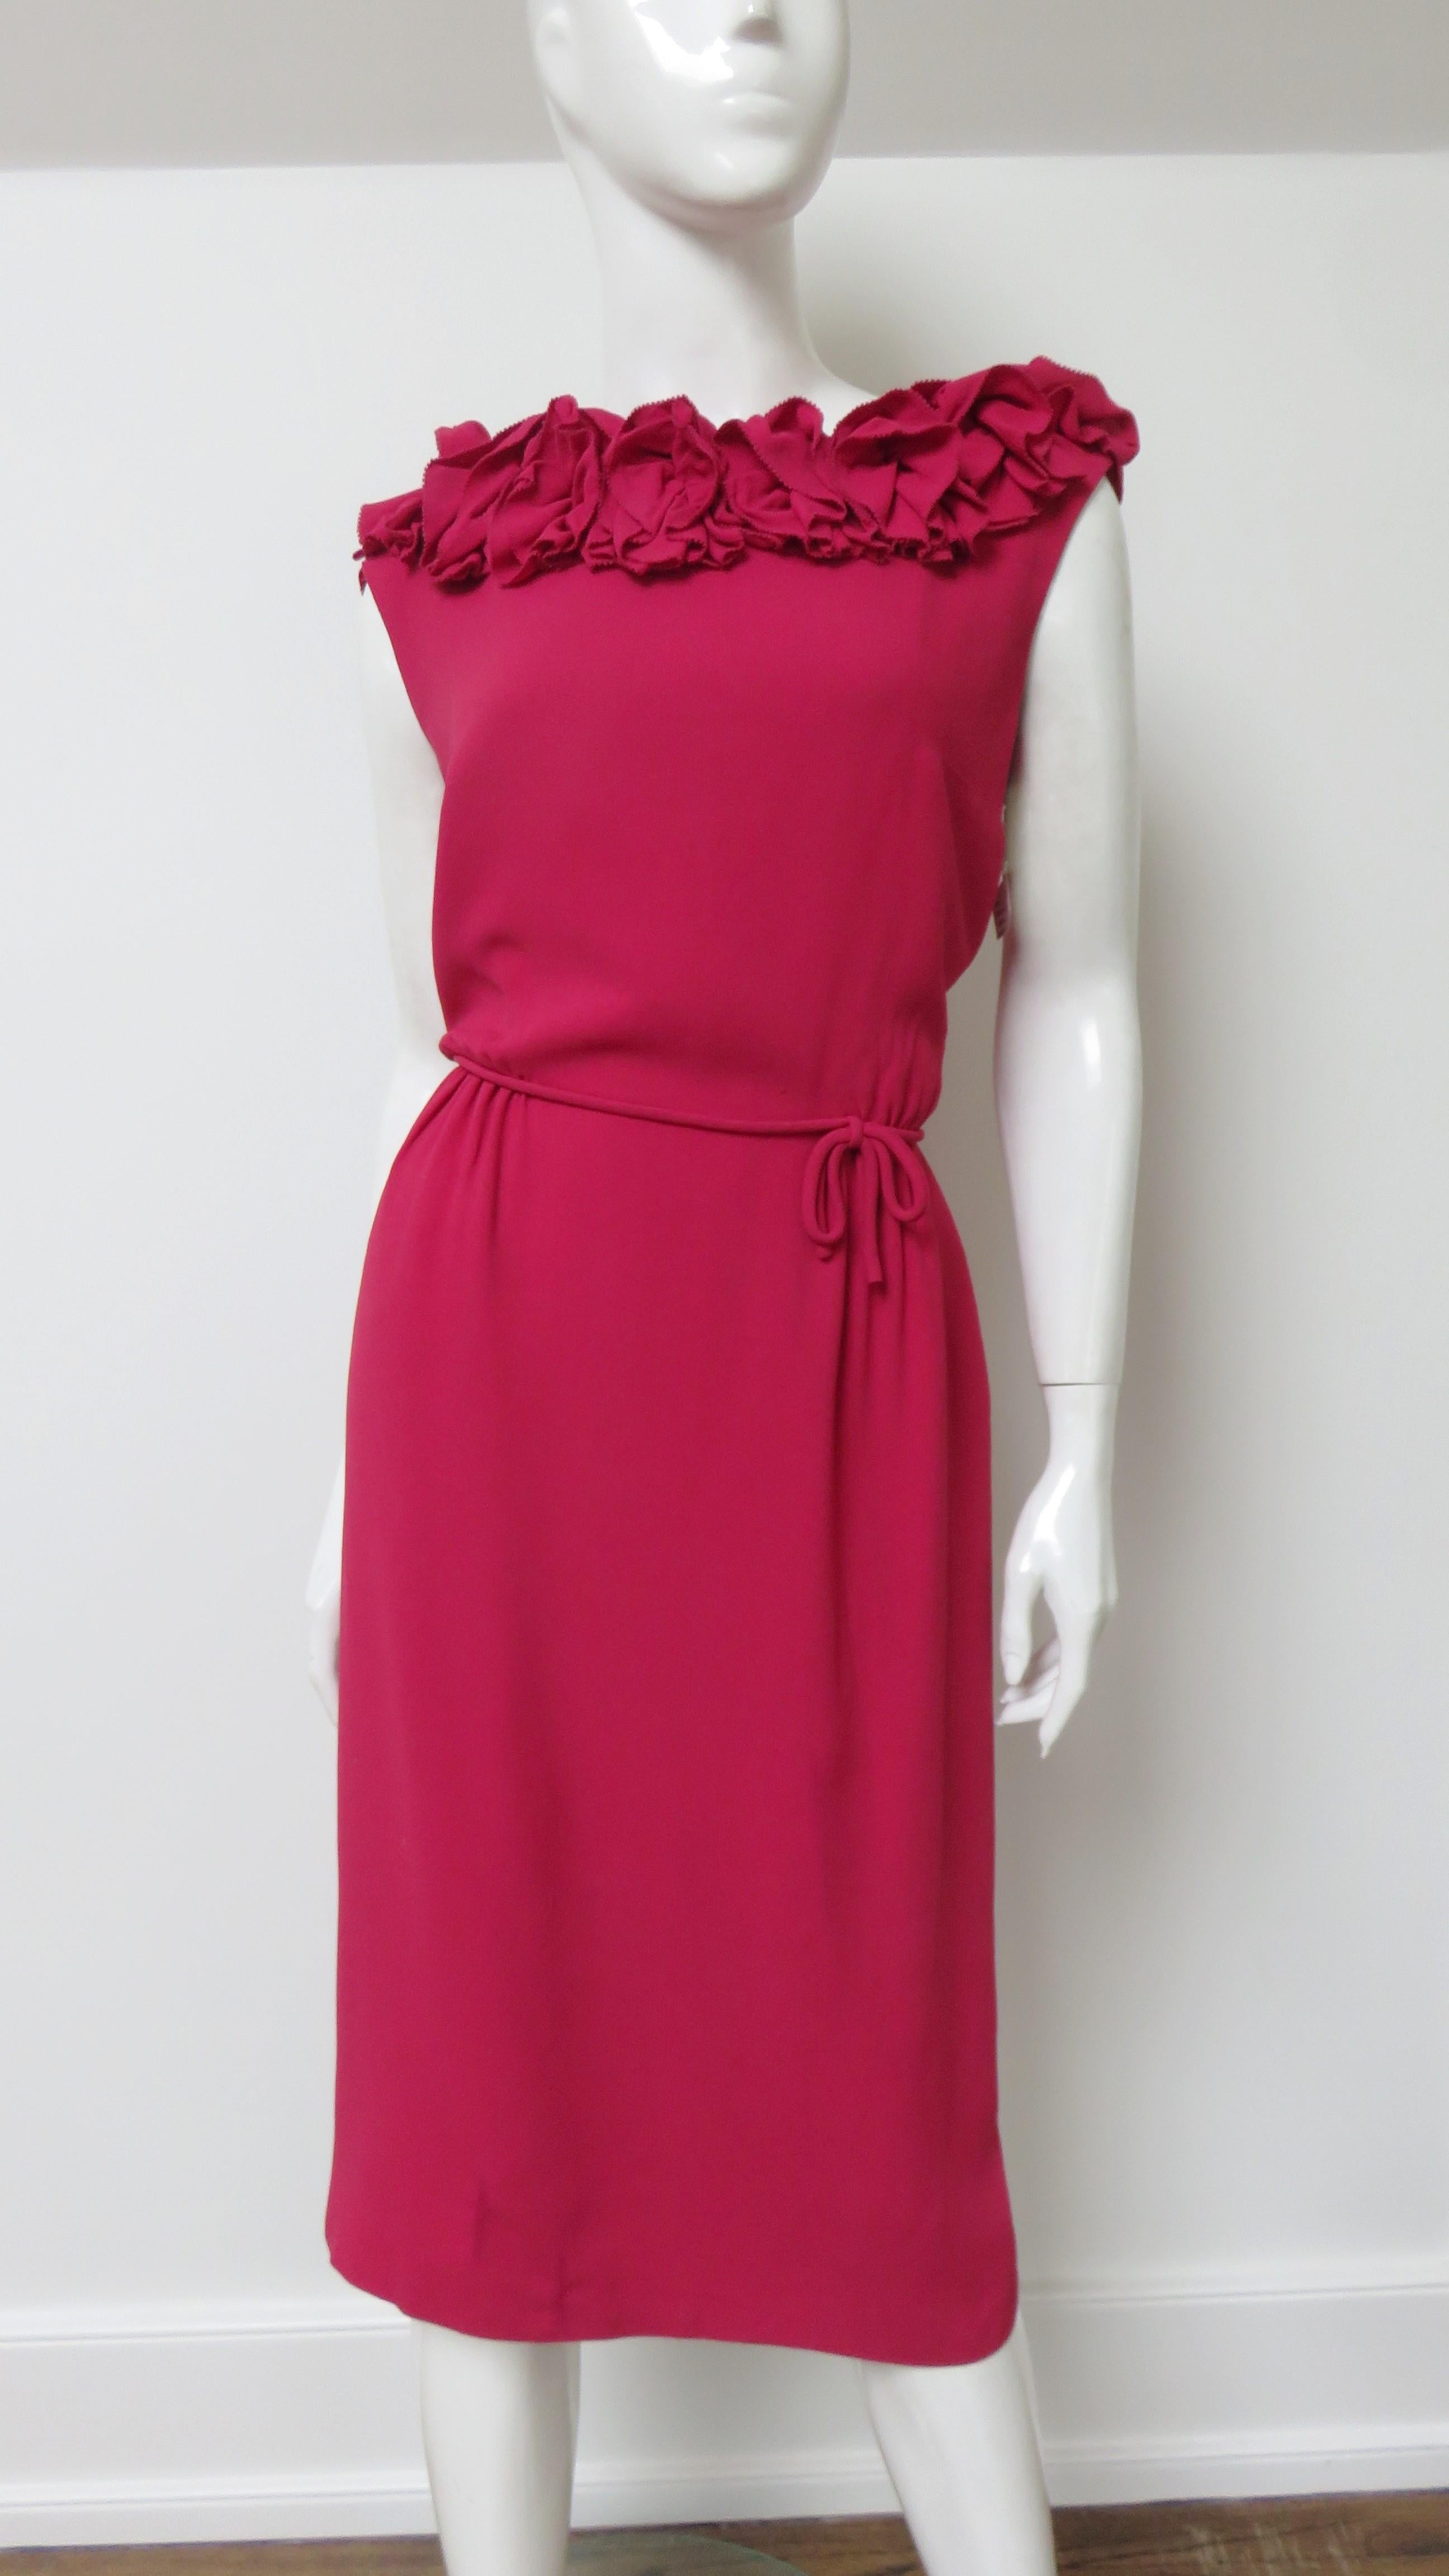 A pretty rose silk dress by Charles Cooper.  It is sleeveless with applique flowers around the neckline and low back.  It has a straight skirt, small piped belt, back zipper and it is fully lined.
Fits sizes Small, Medium.

Bust  36